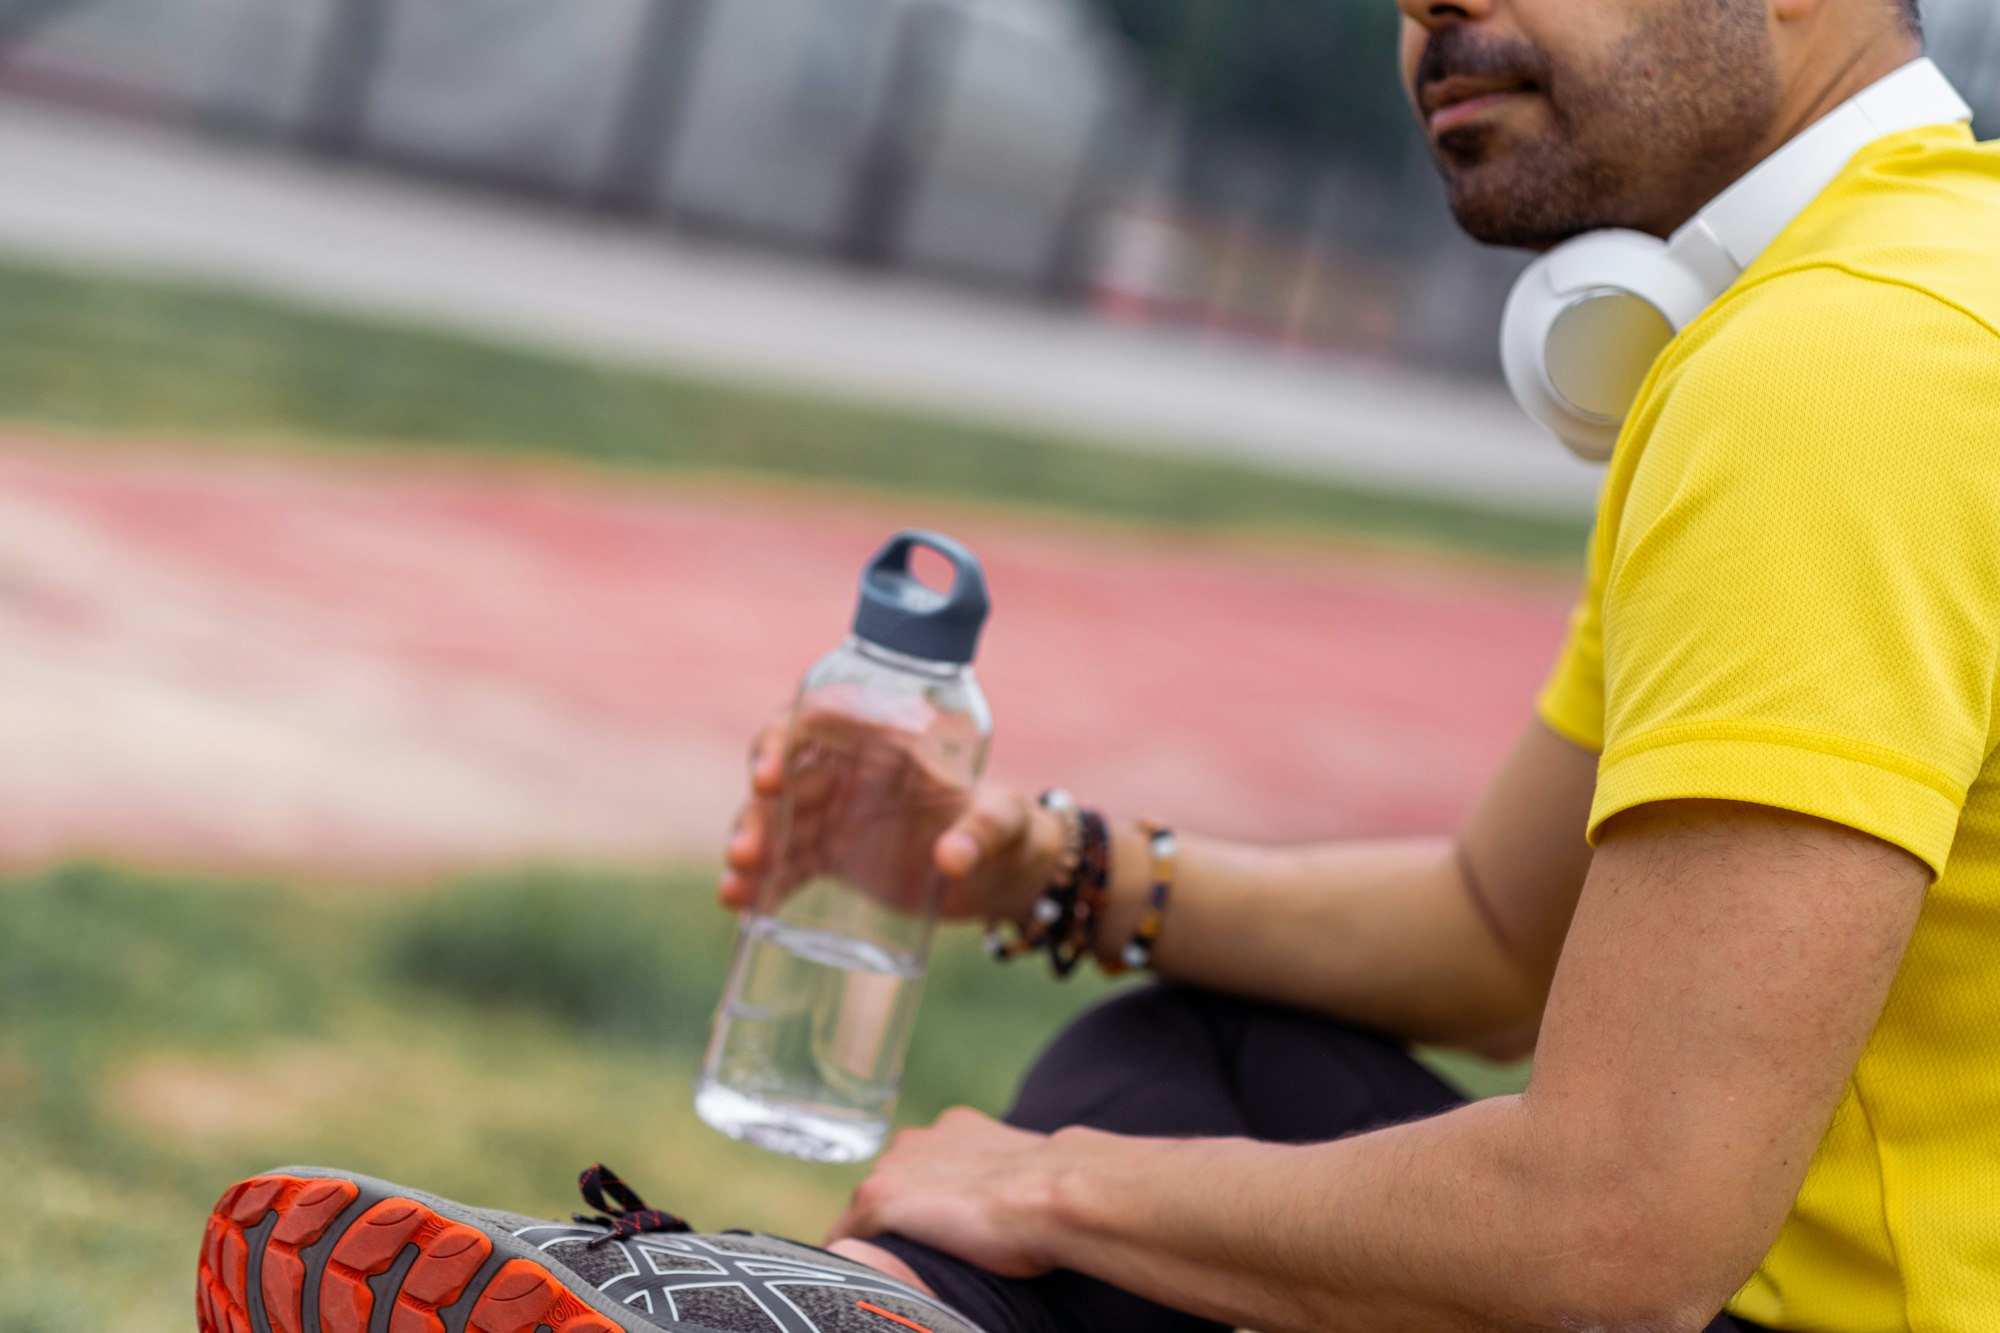 Athlete in colorful t-shirt, with headphones and water bottle during training break at sports arena